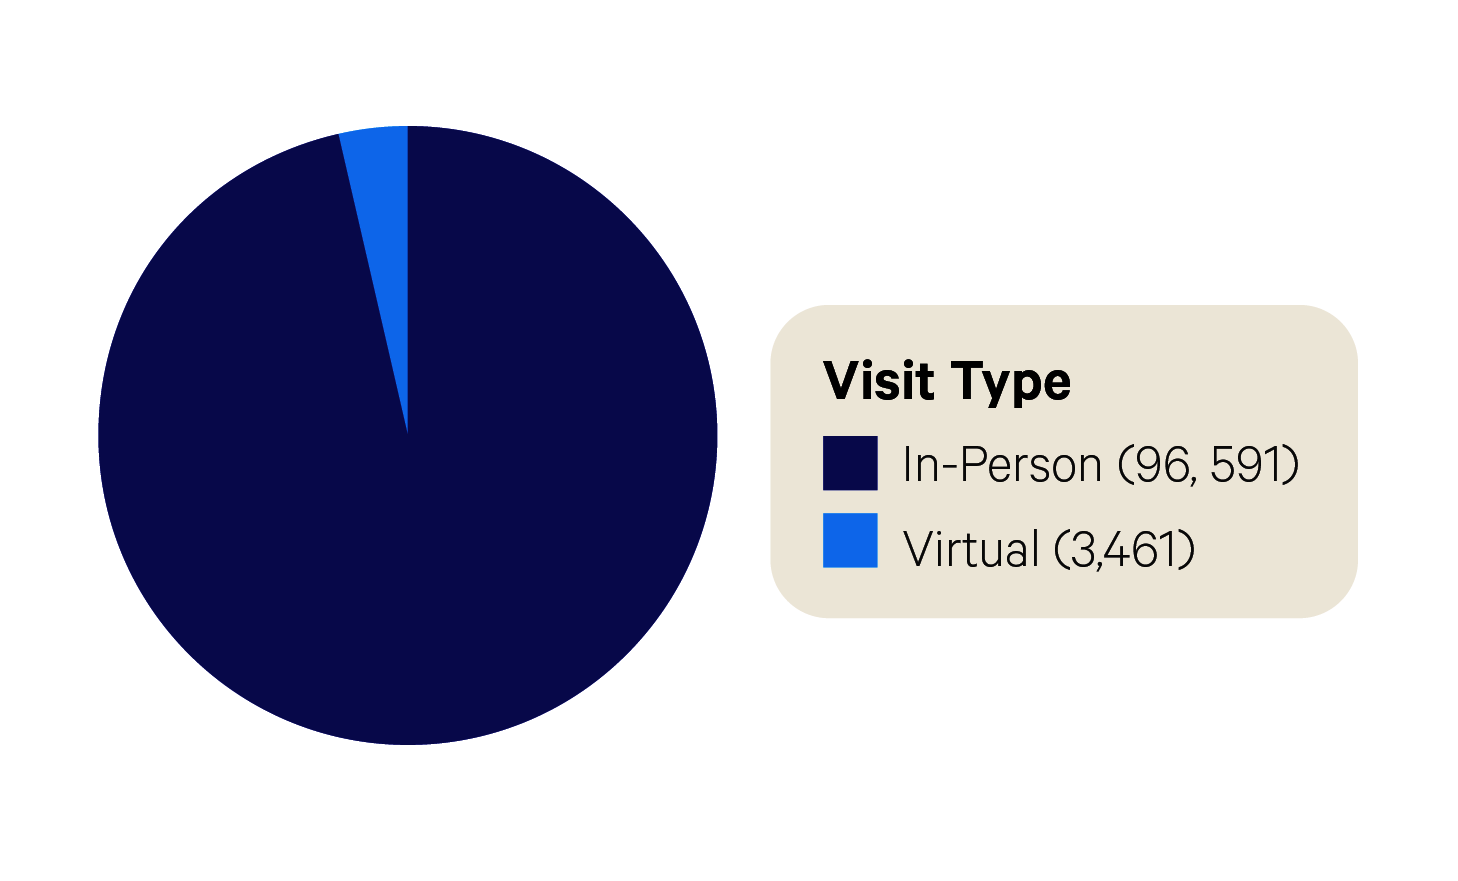 A pie chart titled “Visit Type” consisting of mostly dark blue with a small sliver of cerulean. Its label reads “in person (96591)” and “virtual (3461)”. 